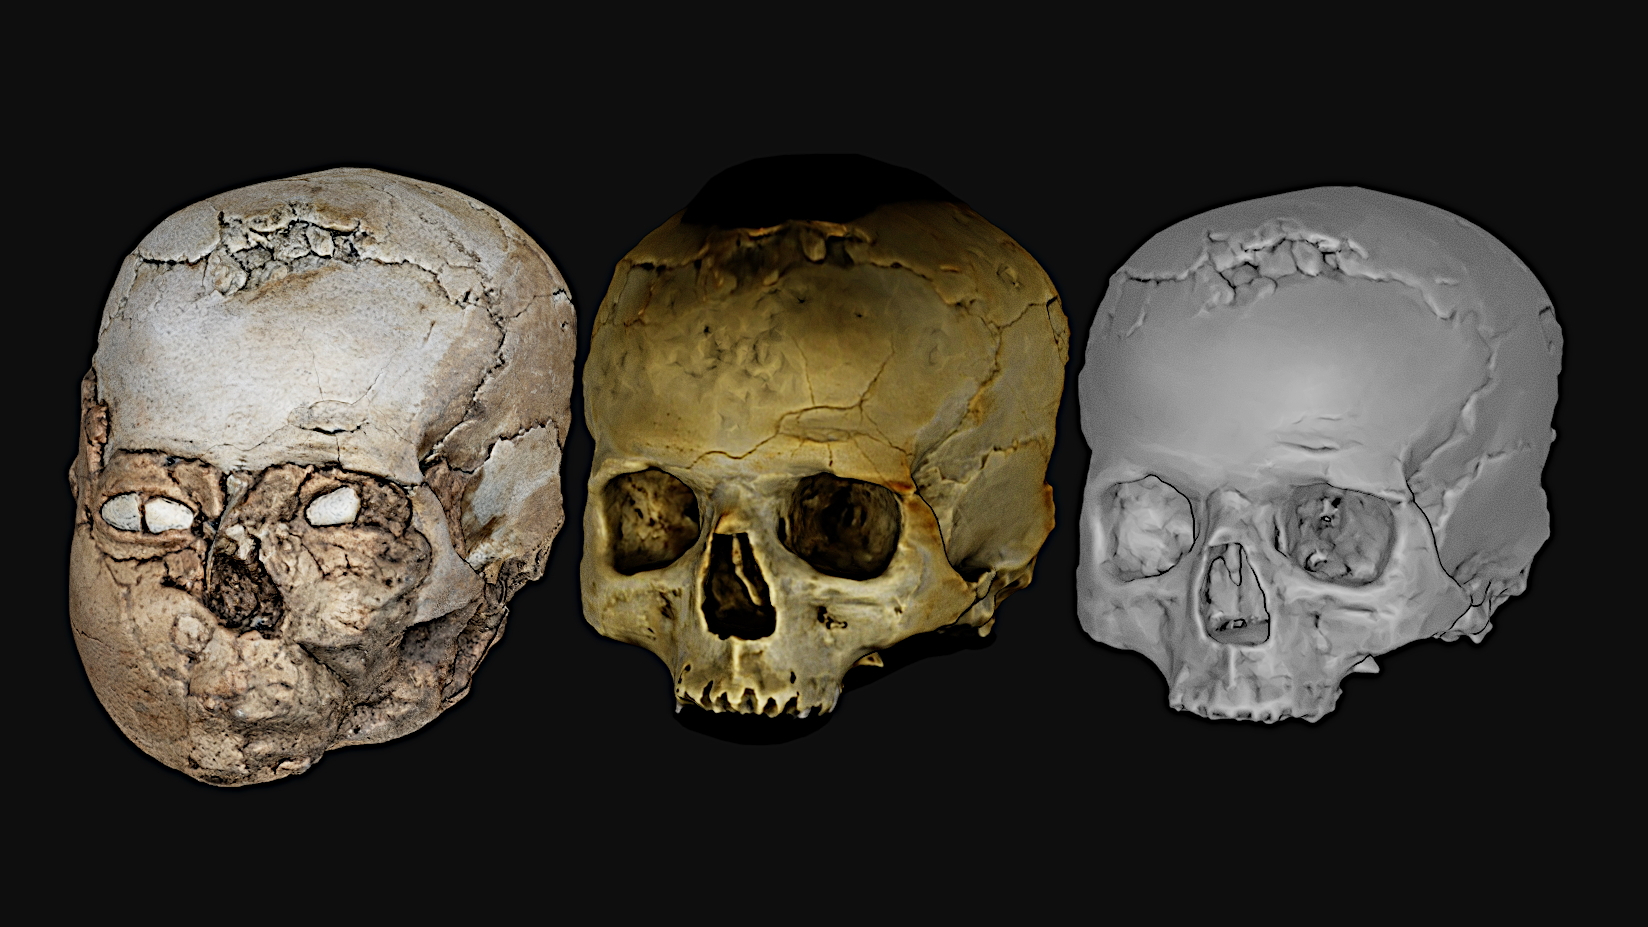 three skulls shown side by side; the far left skull has shells in its eye sockets and some rock obscuring the features of the nose and mouth. The other two skulls show the skull without the shells or rock